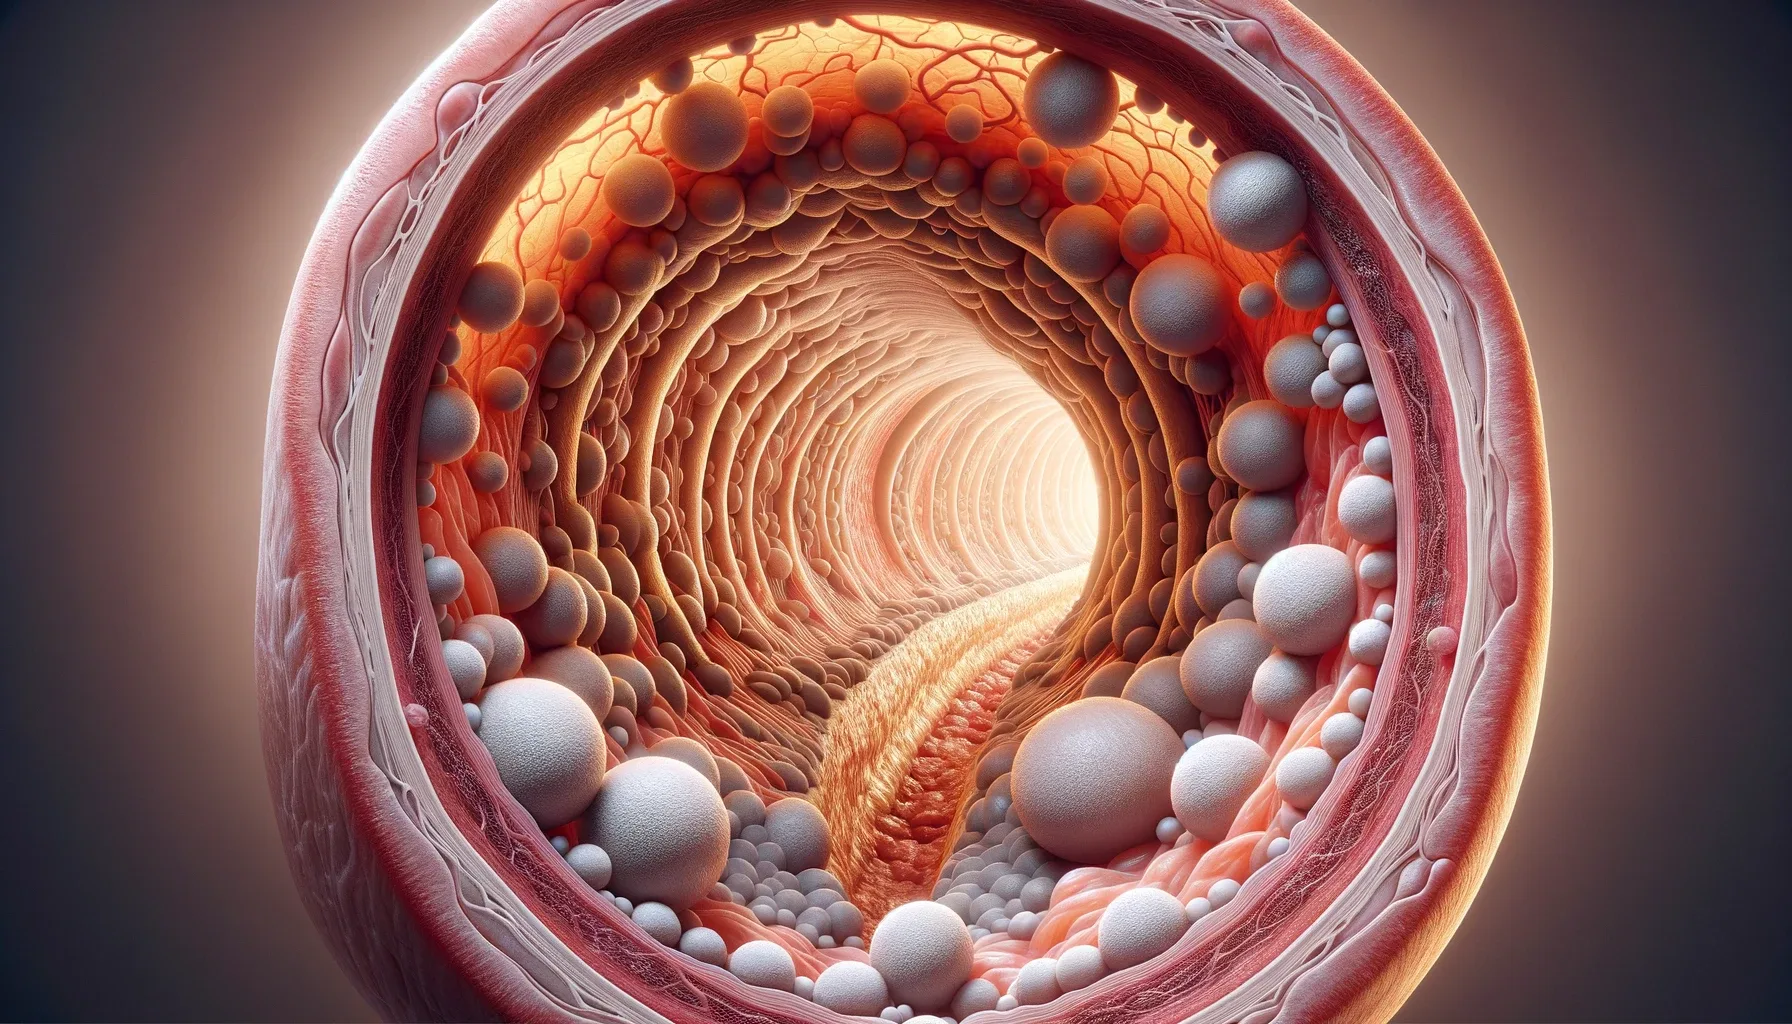 A cross-section view of an artery with cholesterol build-up